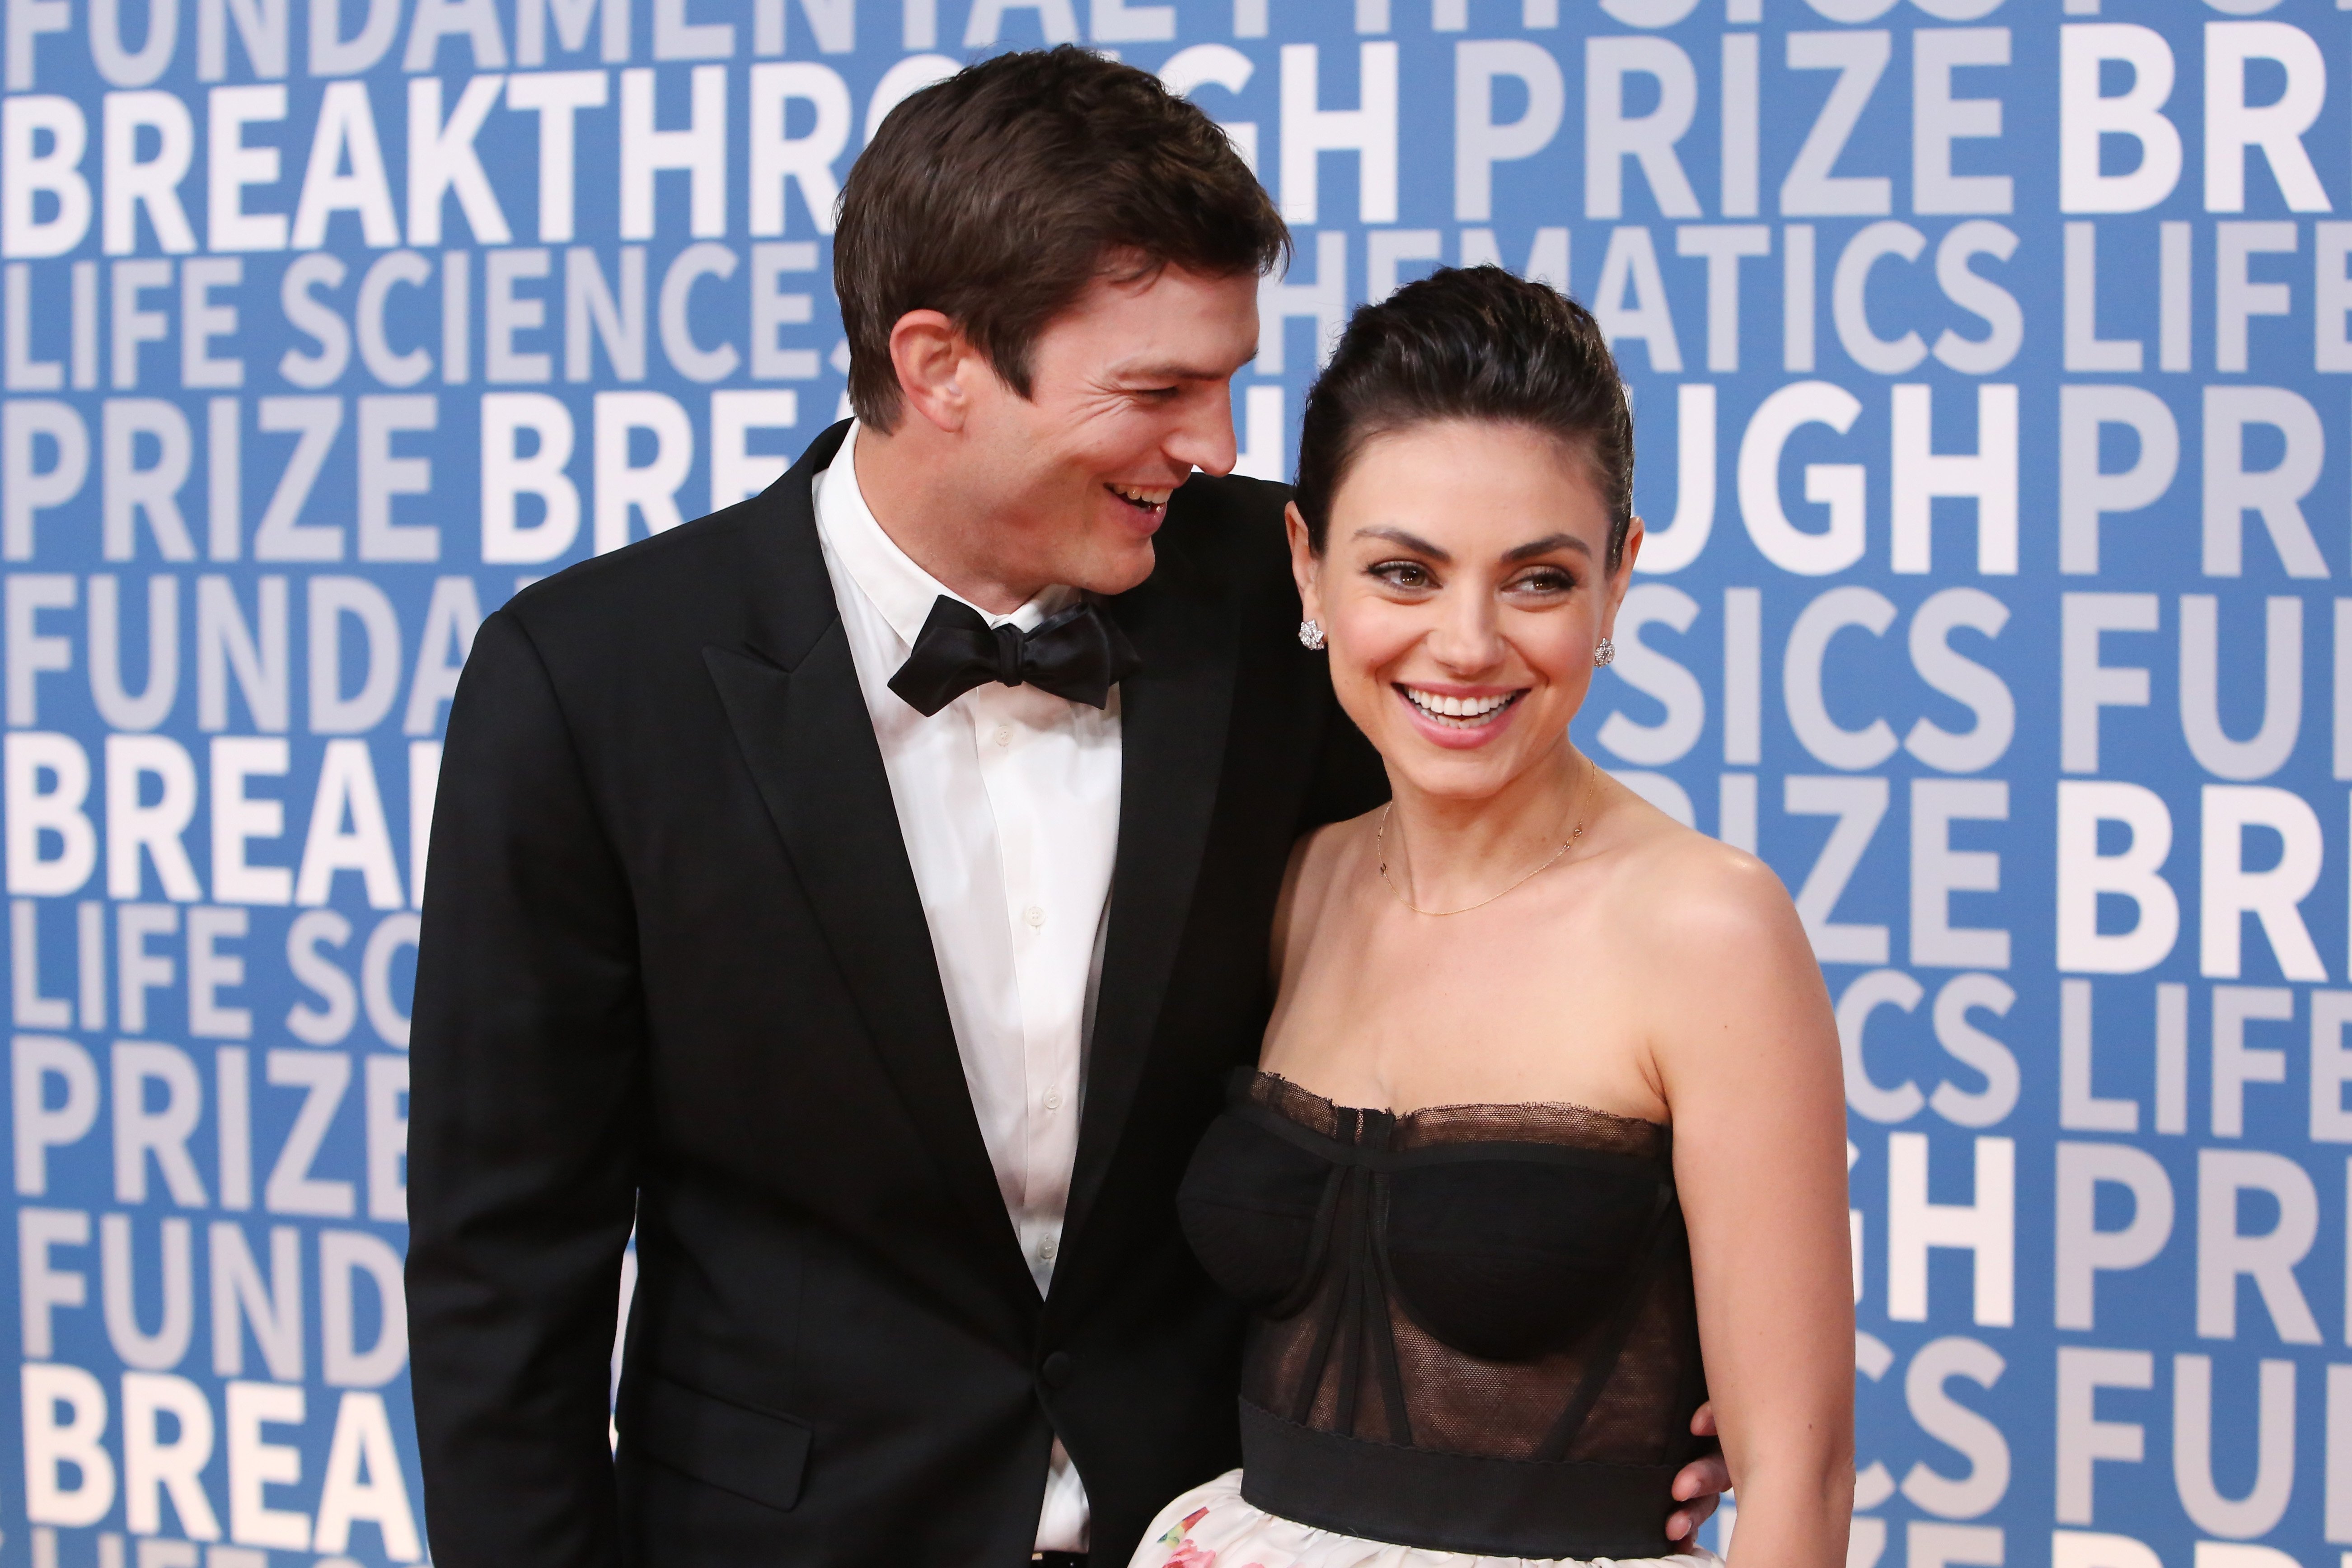 Ashton Kutcher and Mila Kunis attend the 2018 Breakthrough Prize at NASA Ames Research Center on December 3, 2017 in Mountain View, California. | Source: Getty Images